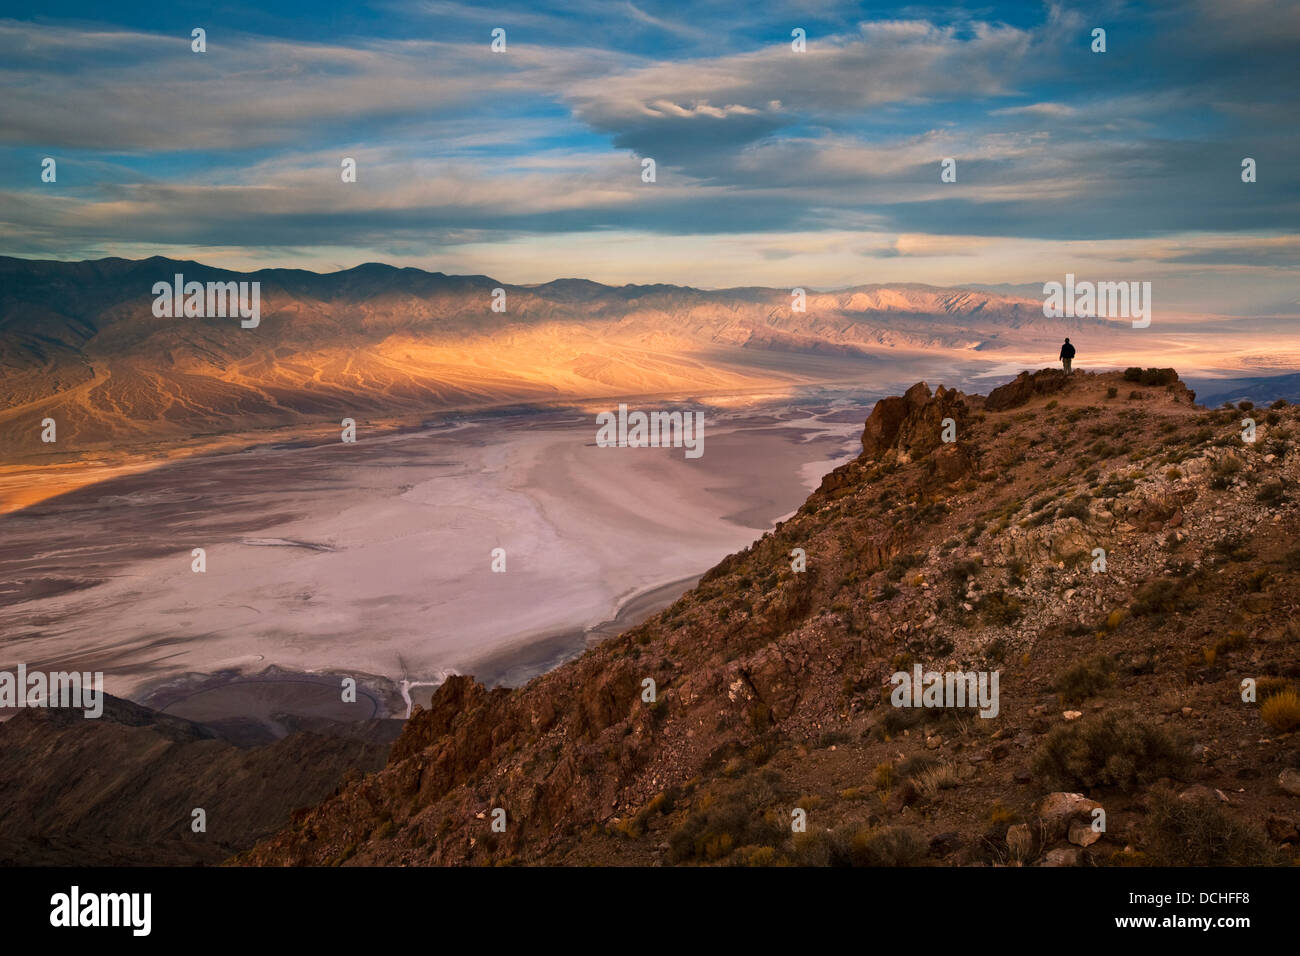 Tourist overlooking Panamint Mountains over Badwater Basin, from Dantes View, Death Valley National Park, California Stock Photo